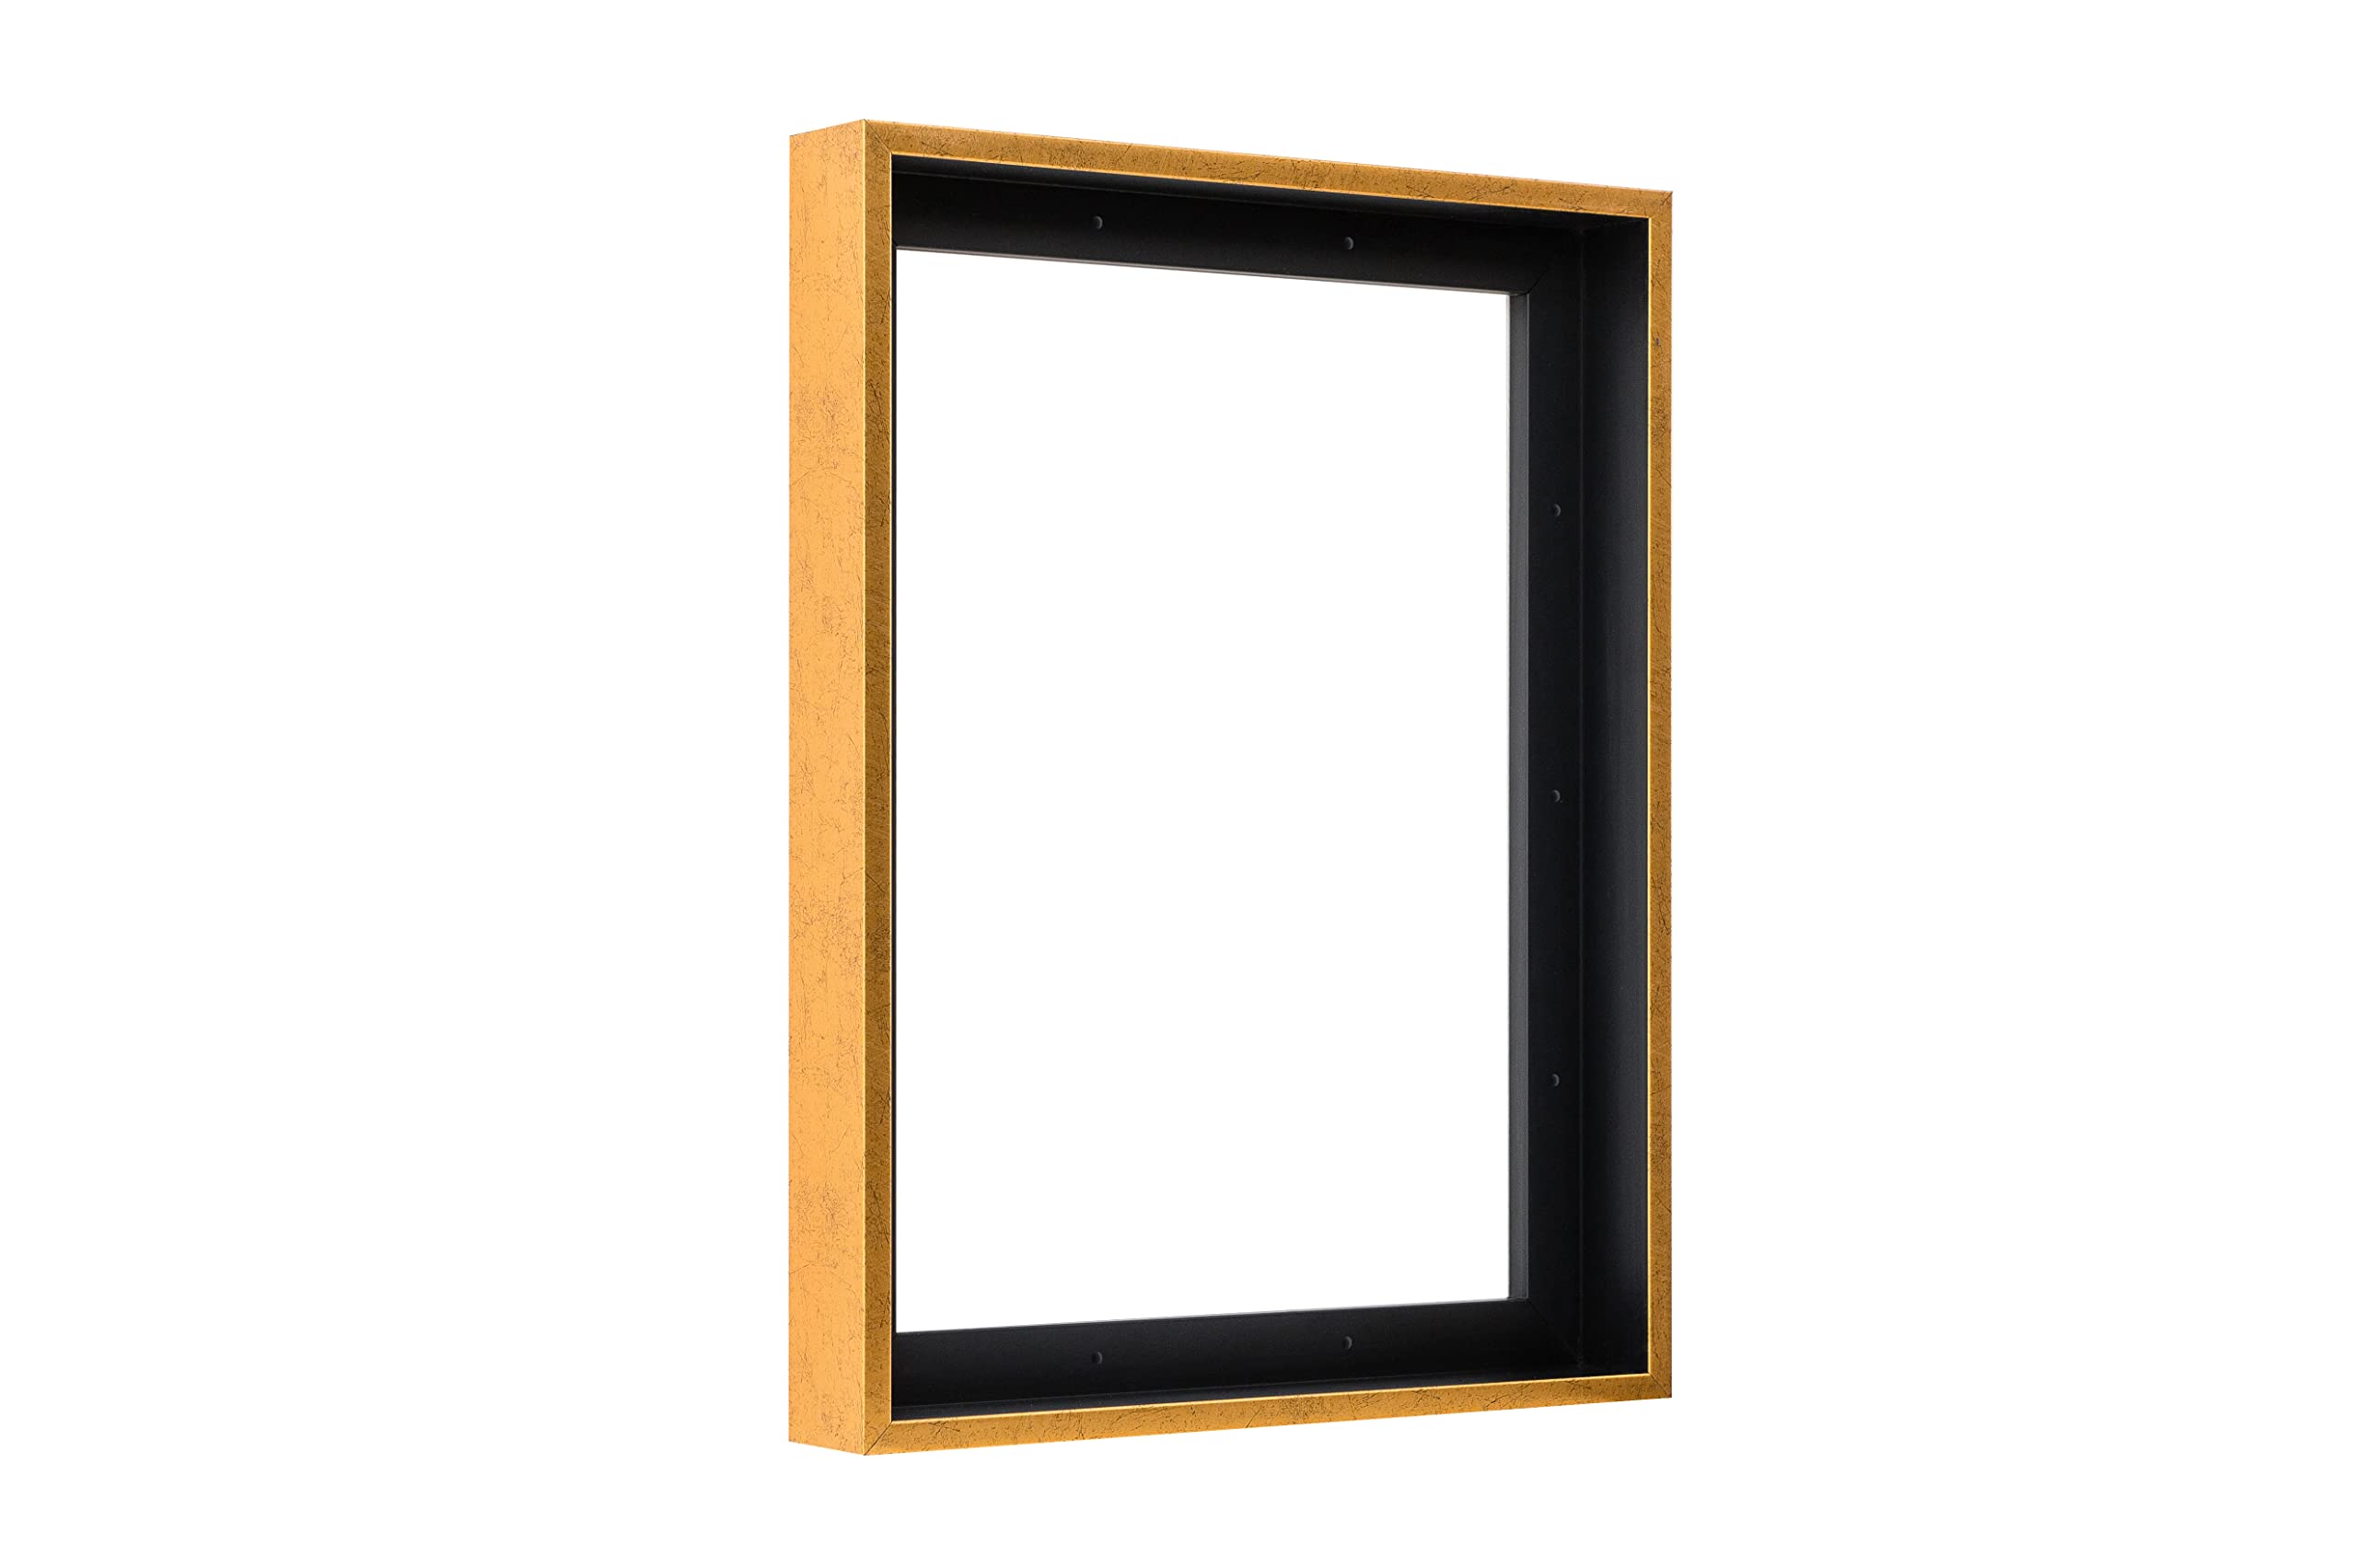 Pixy Canvas 30x30 inch Floater Frame for 1.5 Deep Canvas Paintings, Wood Panels & Stretched Canvas Boards. 4 Colors Available (Rustic Gold, 30 x 30)